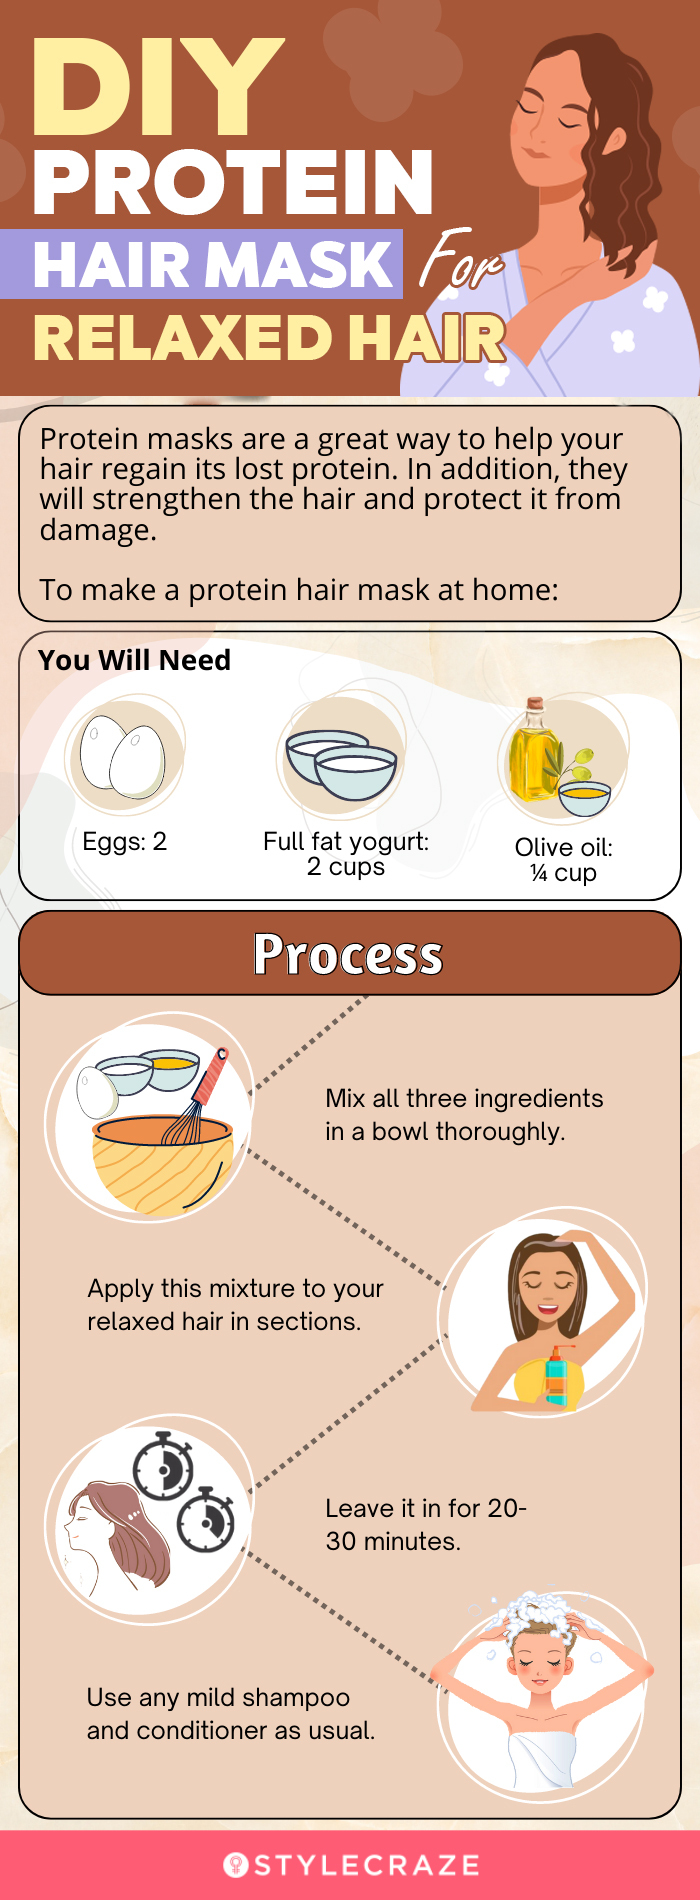 diy protein hair mask for relaxed hair (infographic)